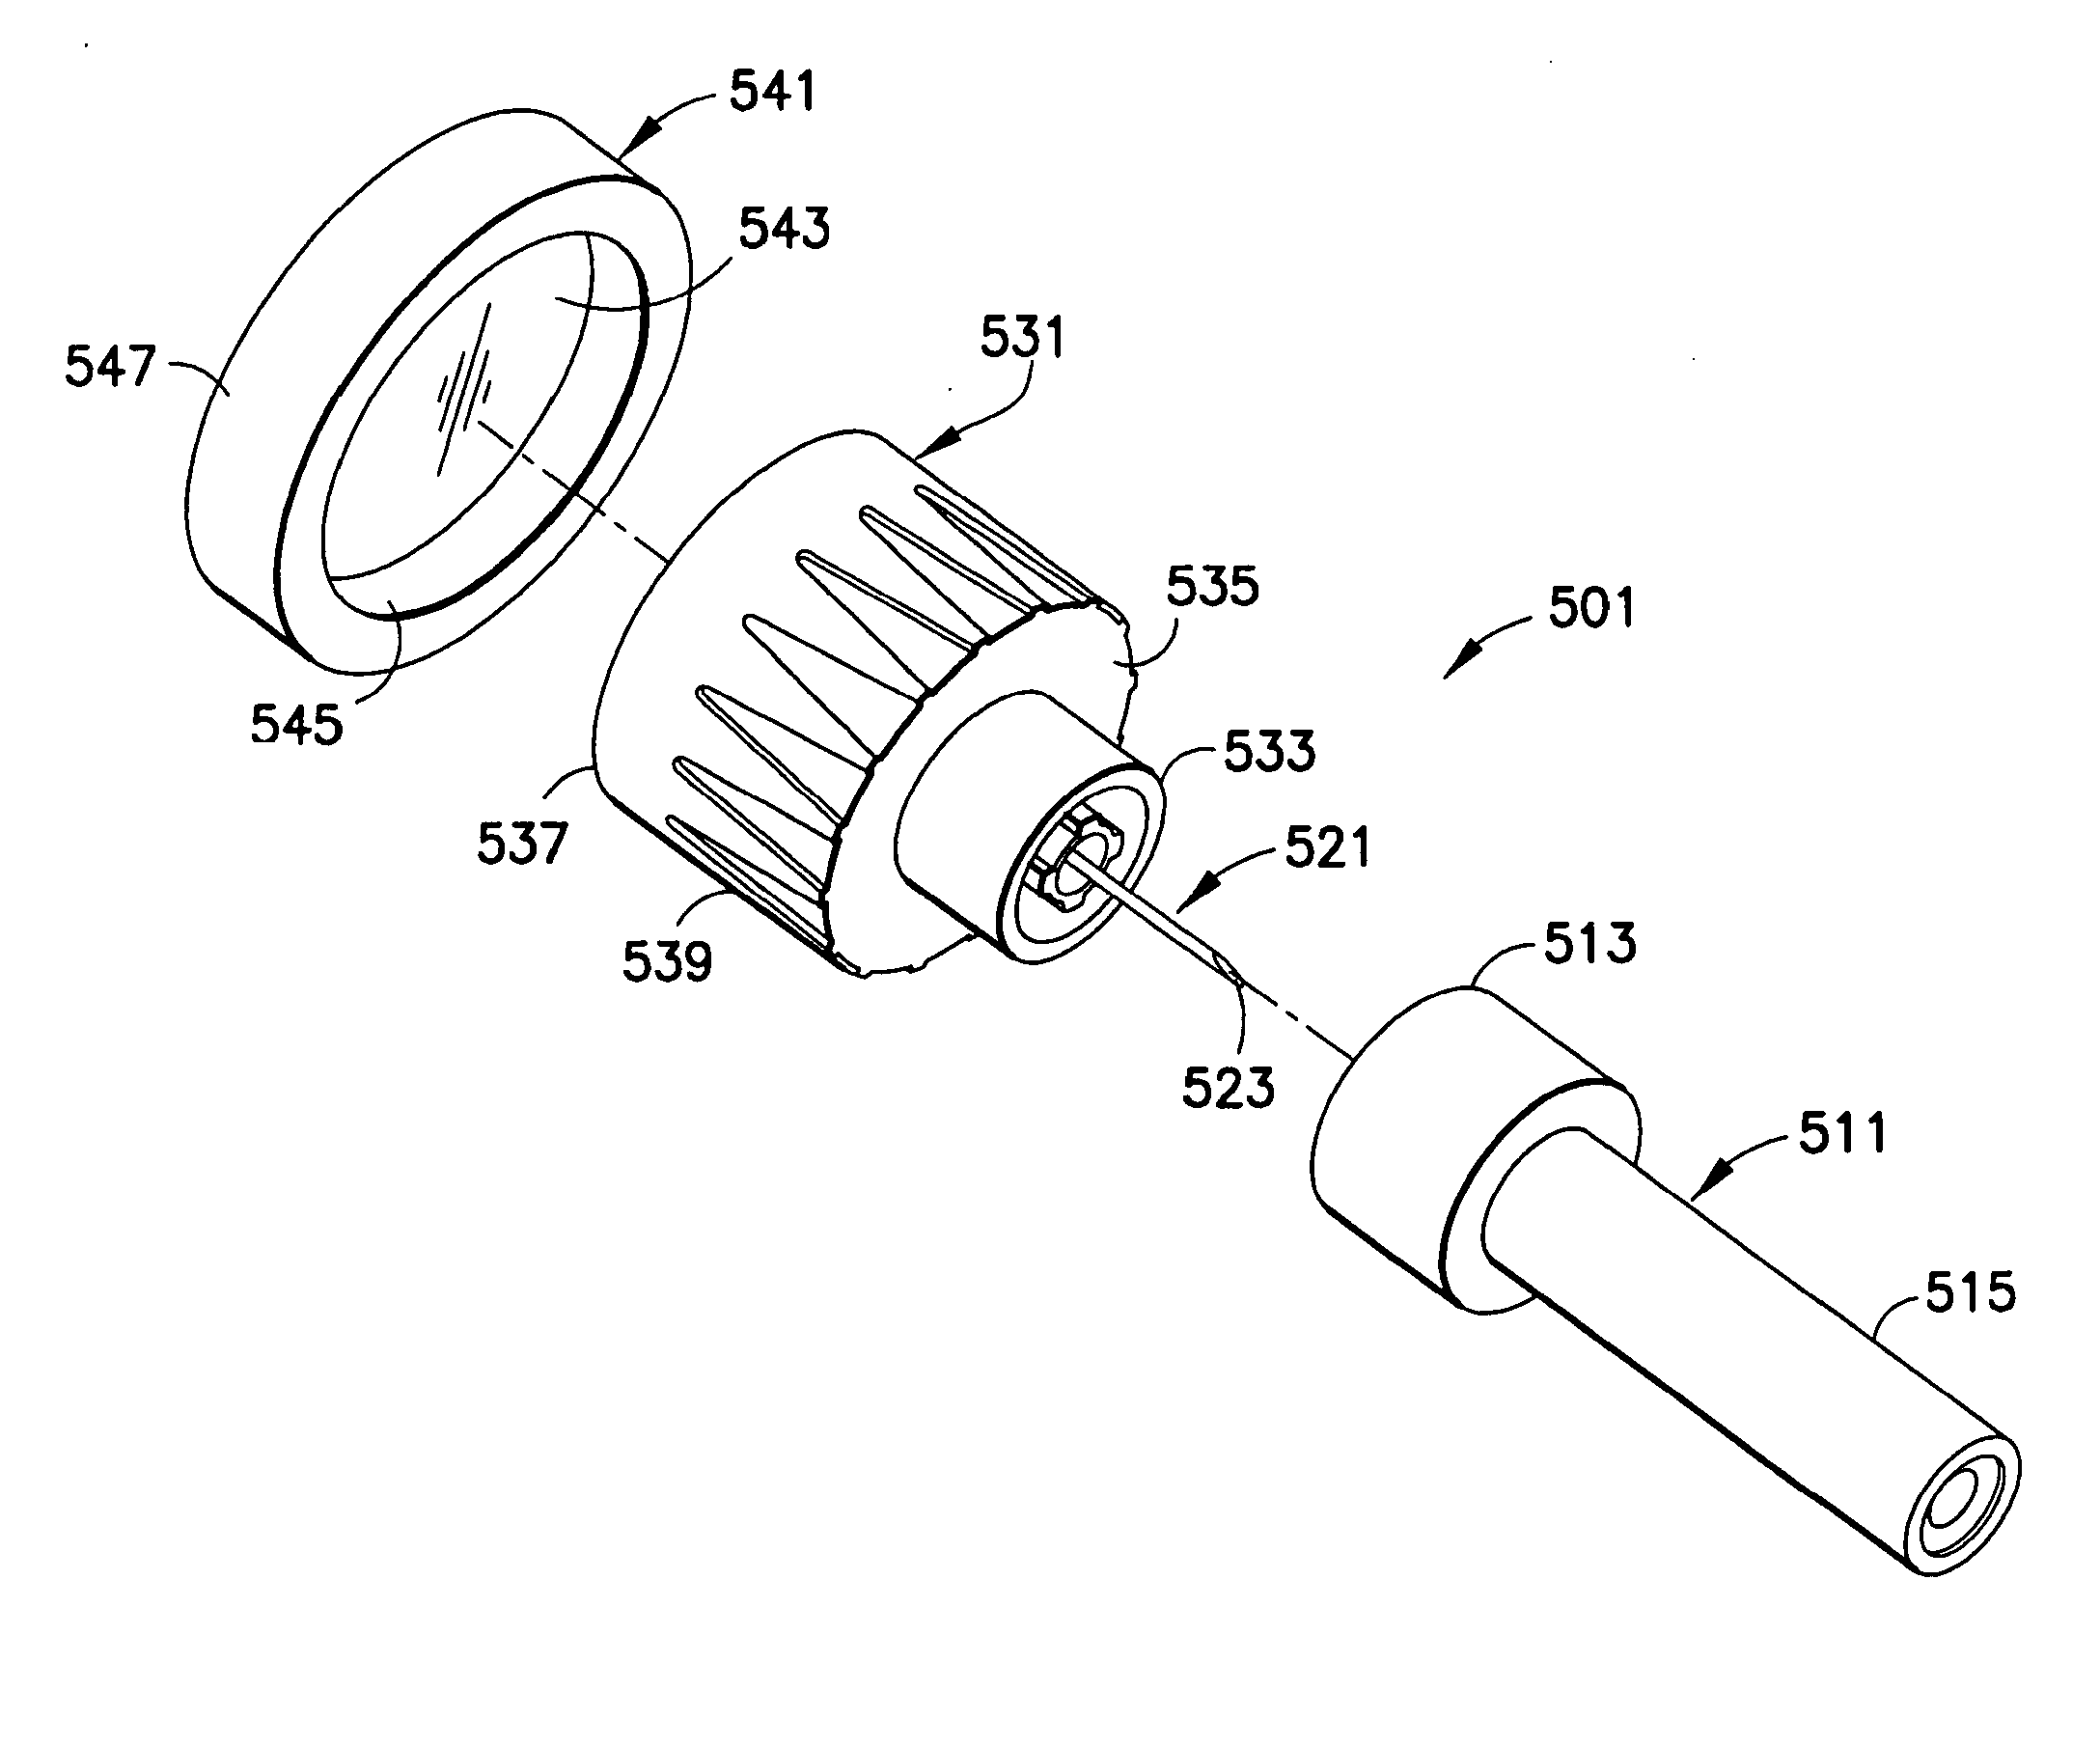 Pen needle assembly having biodegradable components